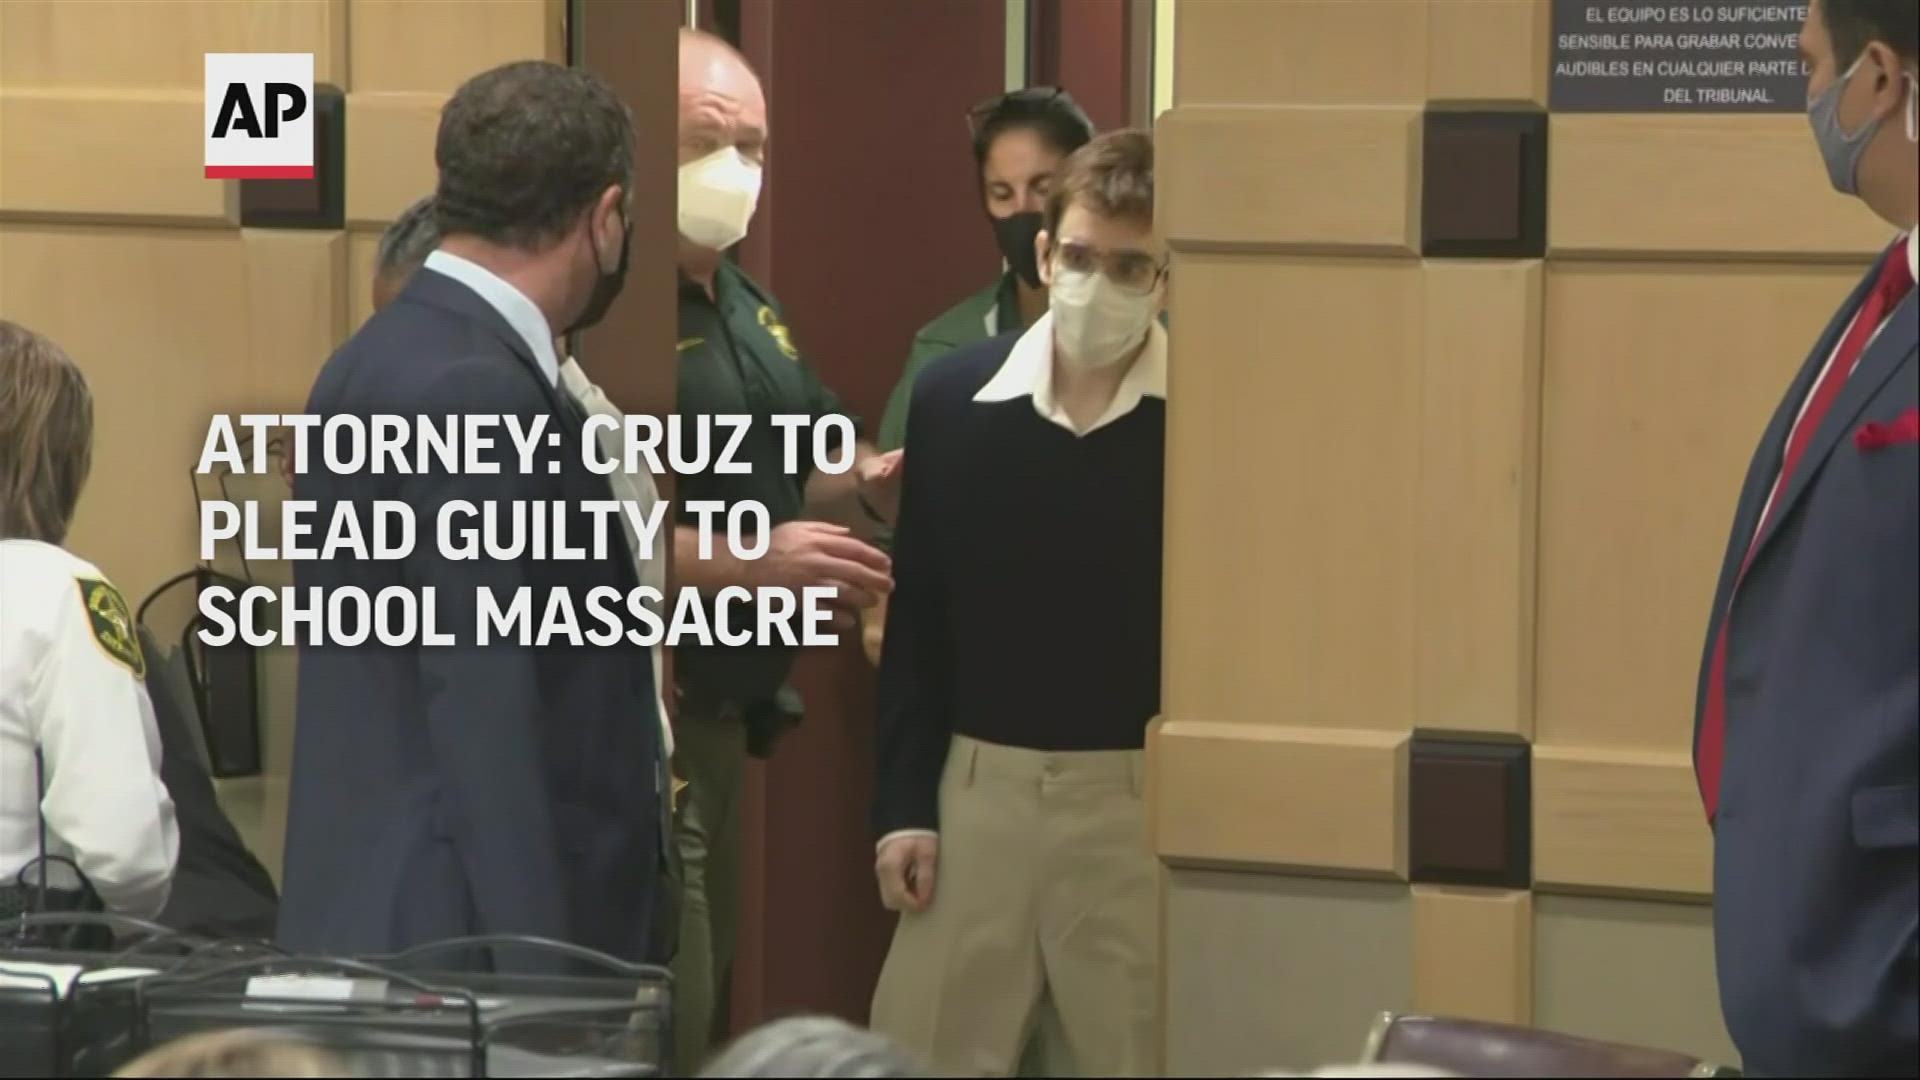 The lawyers for accused Florida school shooter Nikolas Cruz say he plans to plead guilty to the 2018 massacre at a Parkland high school.